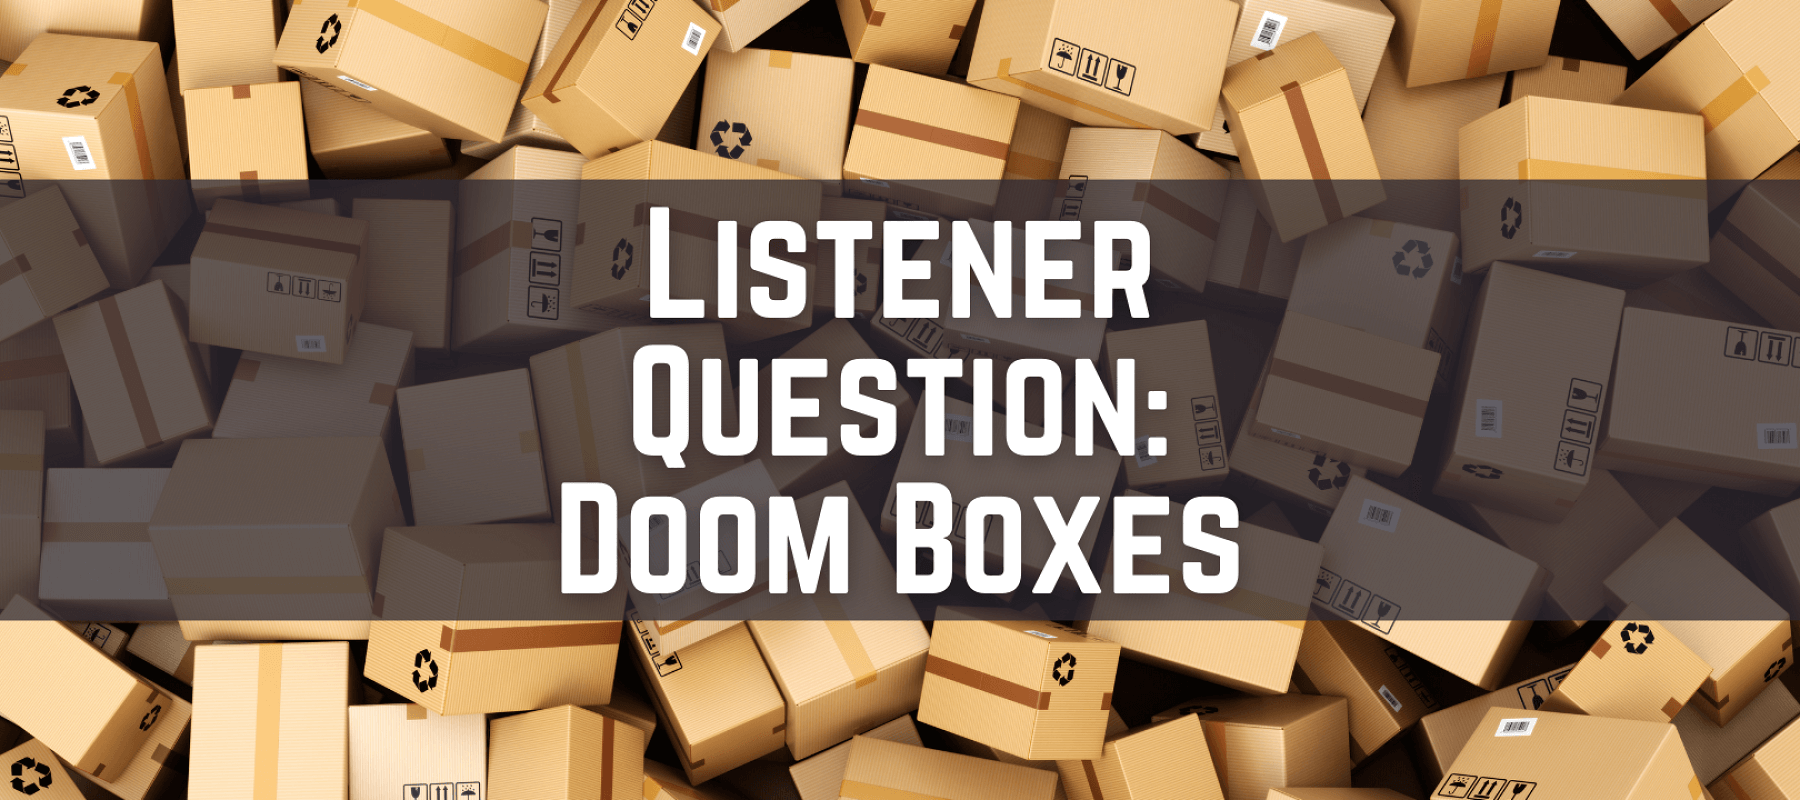 What Are Doom Boxes?